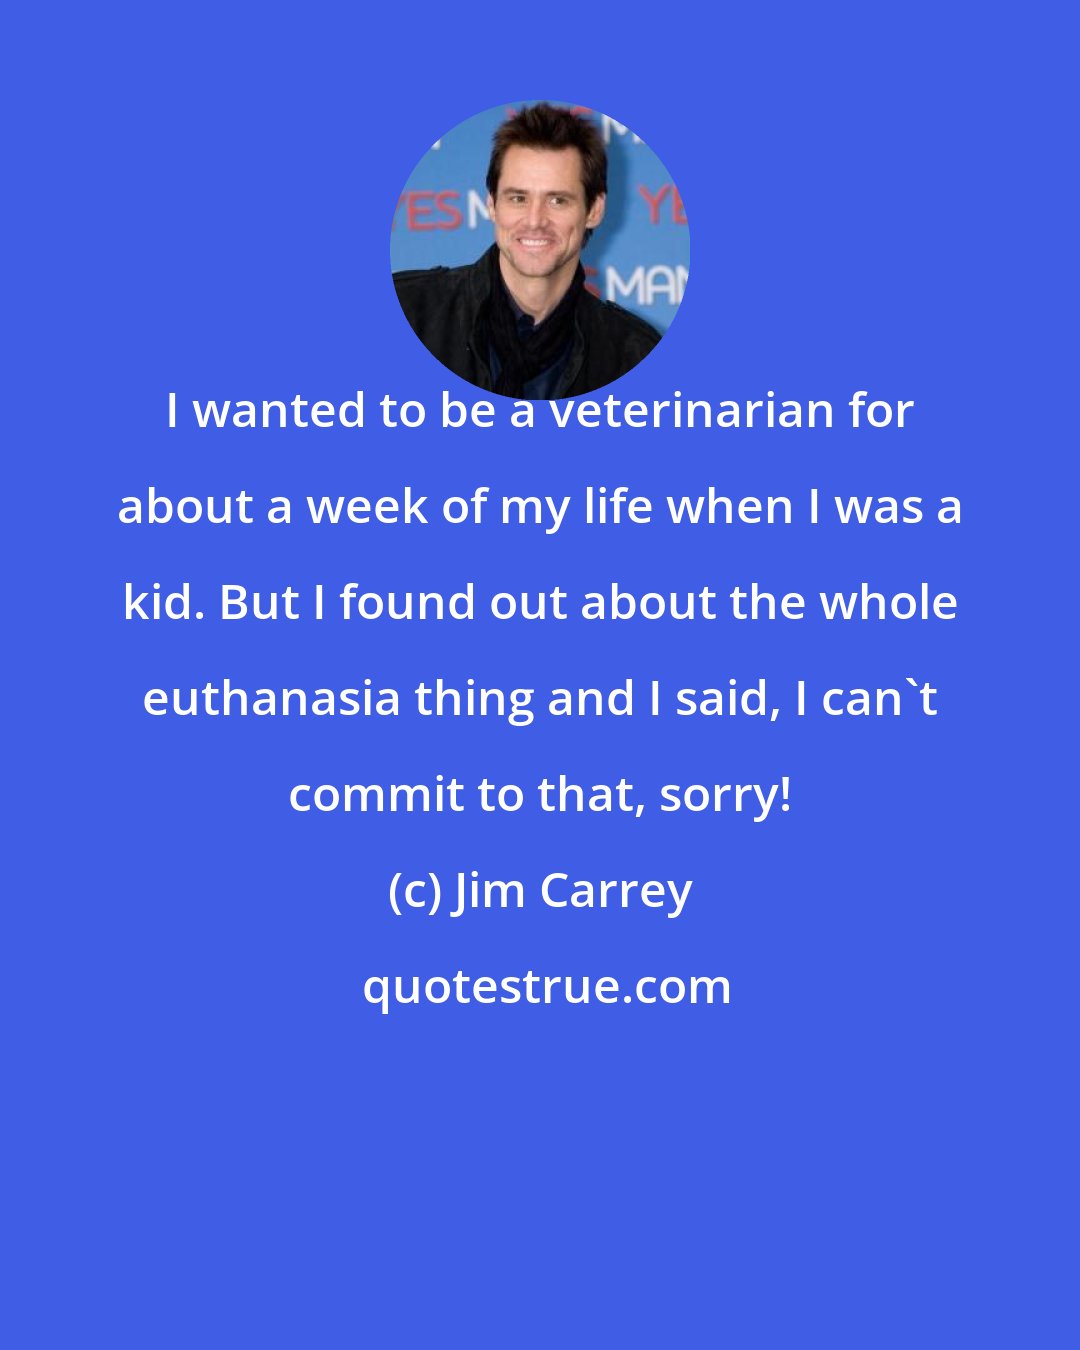 Jim Carrey: I wanted to be a veterinarian for about a week of my life when I was a kid. But I found out about the whole euthanasia thing and I said, I can't commit to that, sorry!